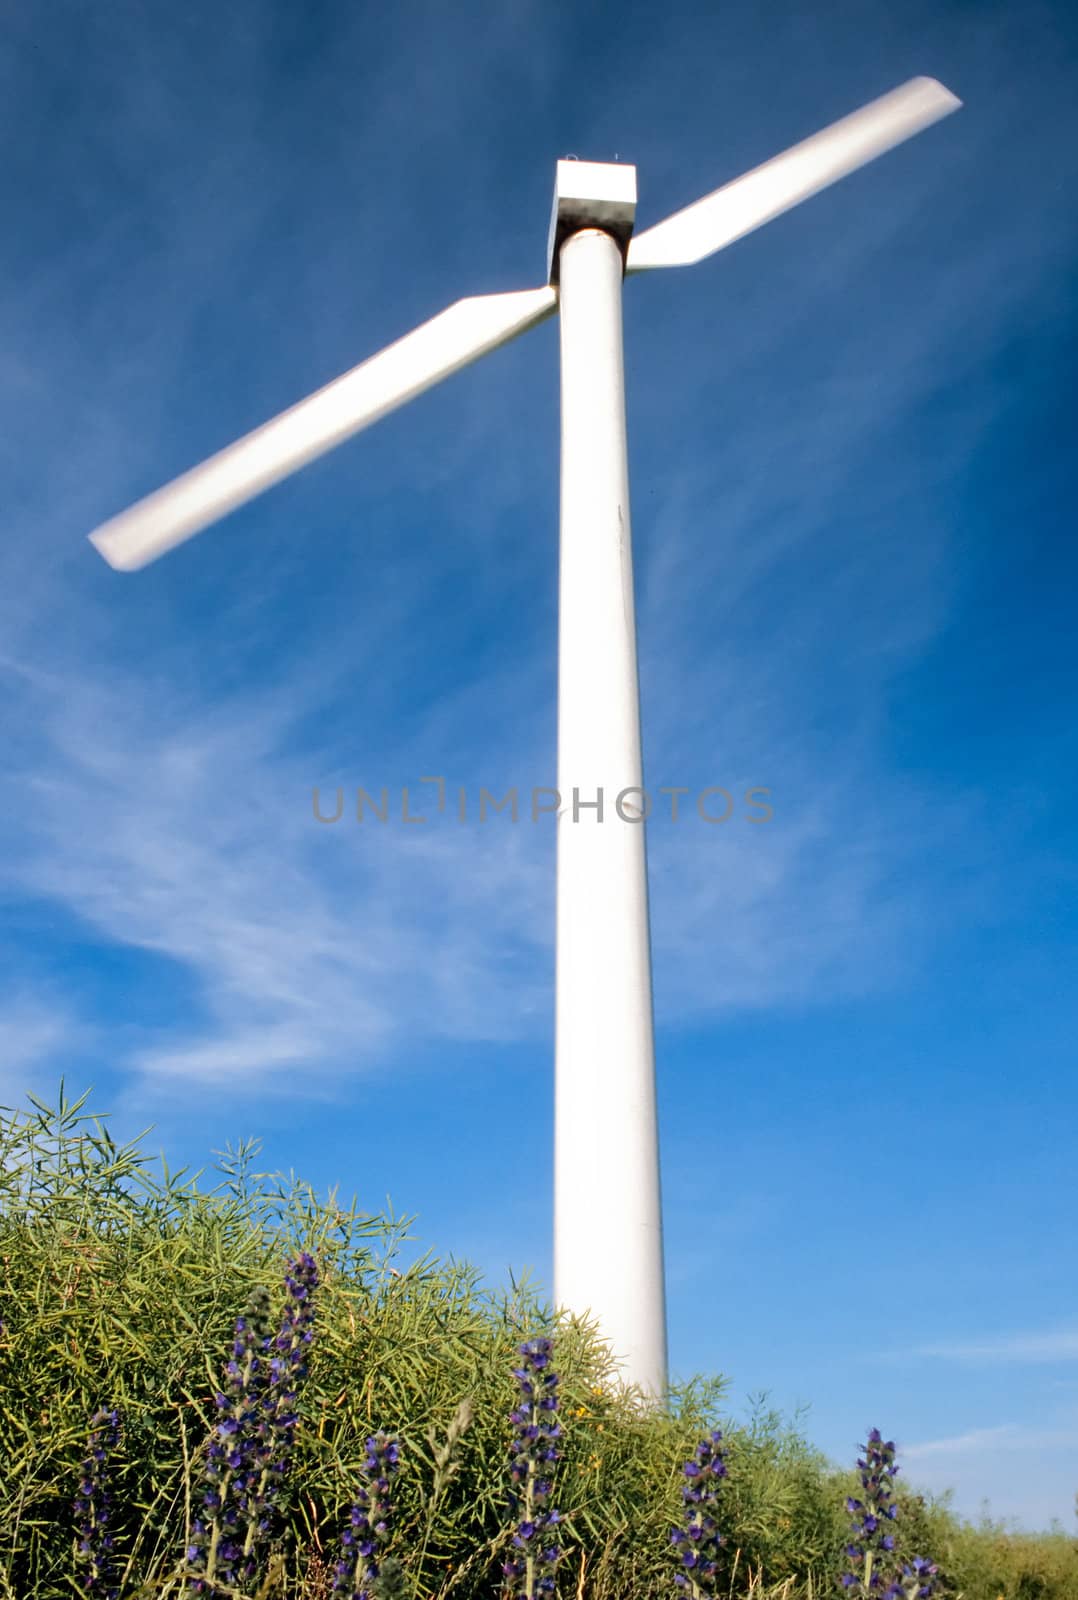 Dual-wing wind turbine on agricultural land (motion blur on rotor)